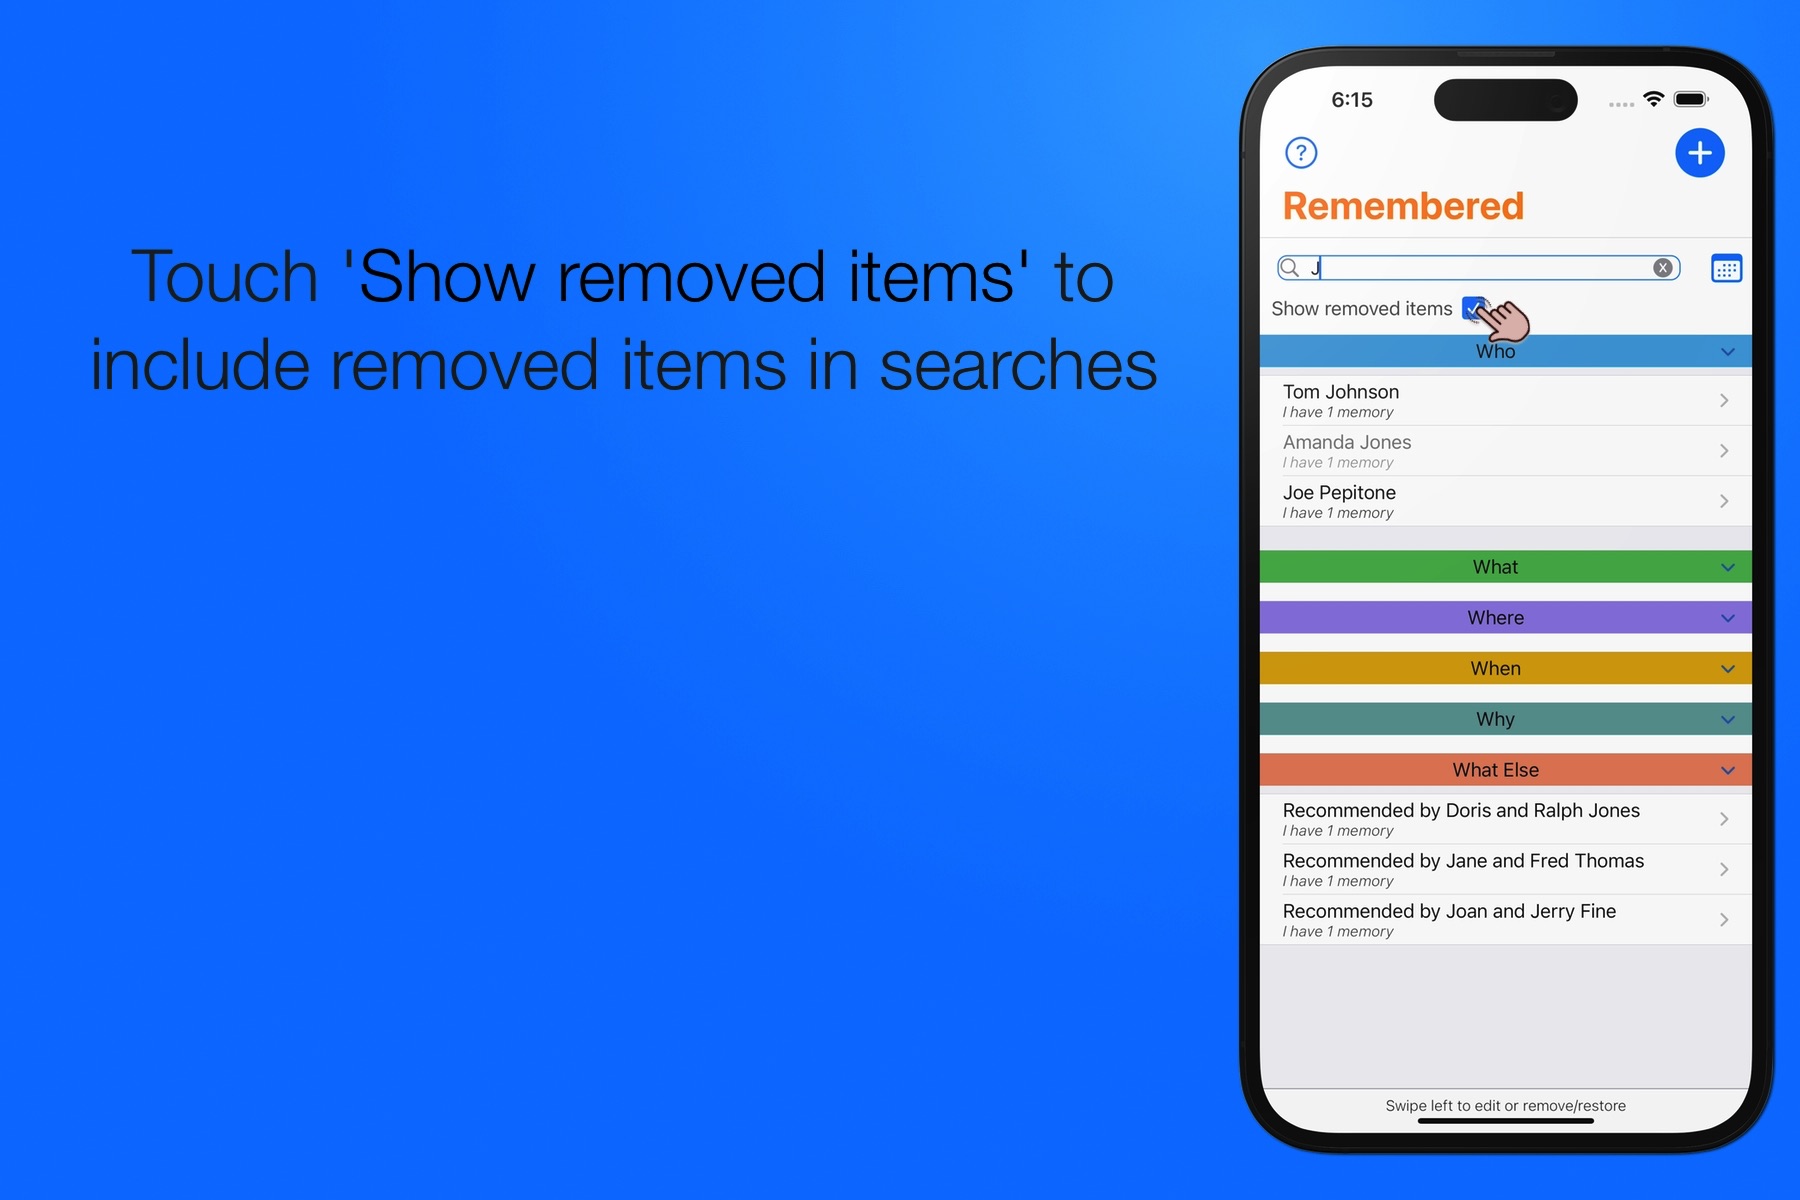 To include removed items in searches, touch Show Removed Items.